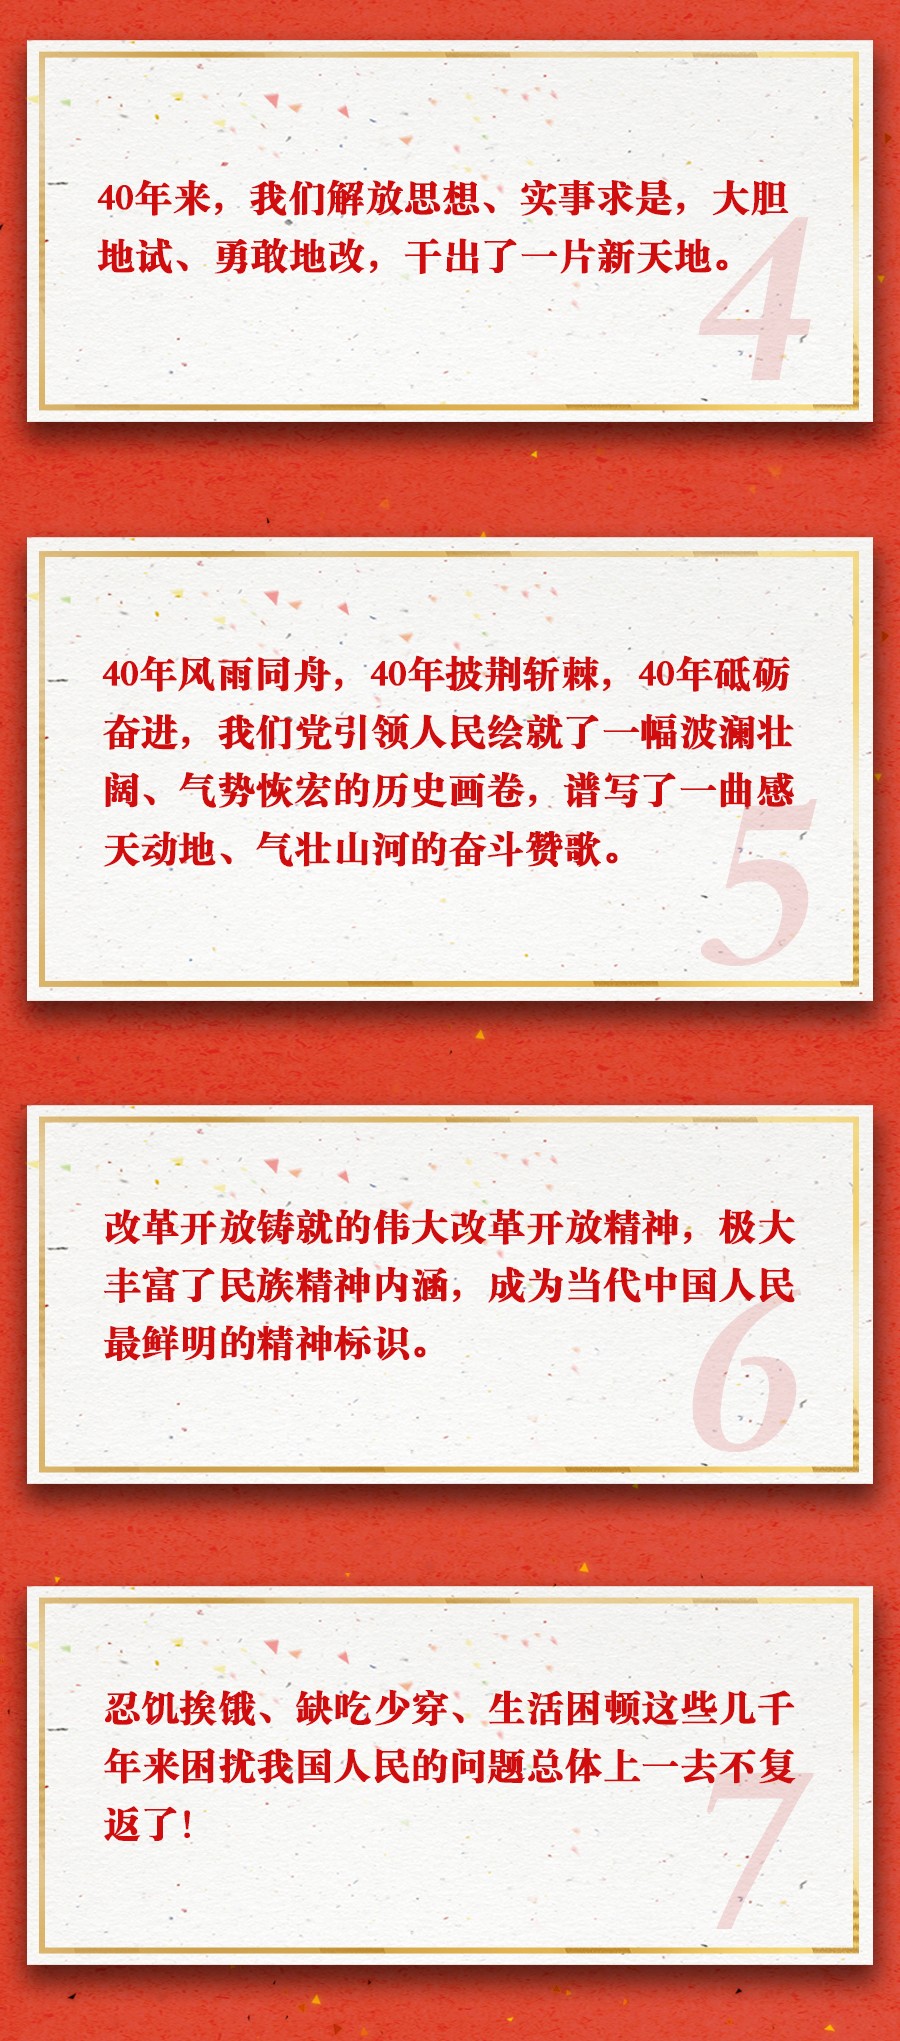 Celebrate the 40th anniversary of reform and opening up! President Xi's Important Speeches Edition + Golden Sentences are Coming